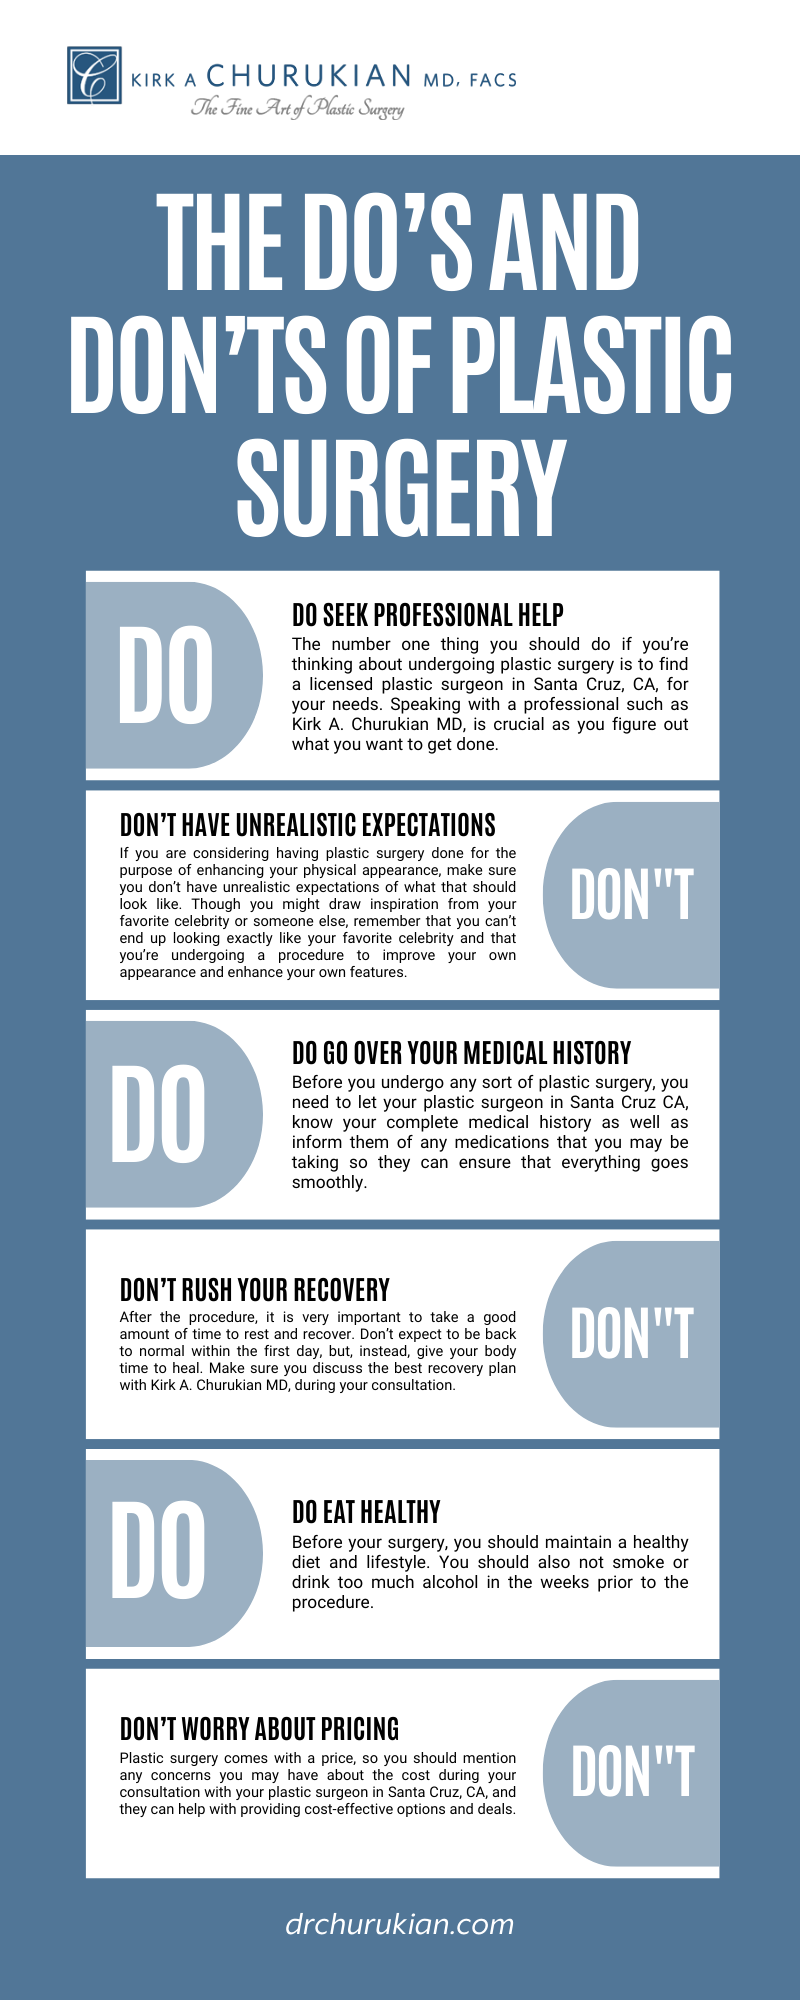 The Do’s and Don’ts of Plastic Surgery